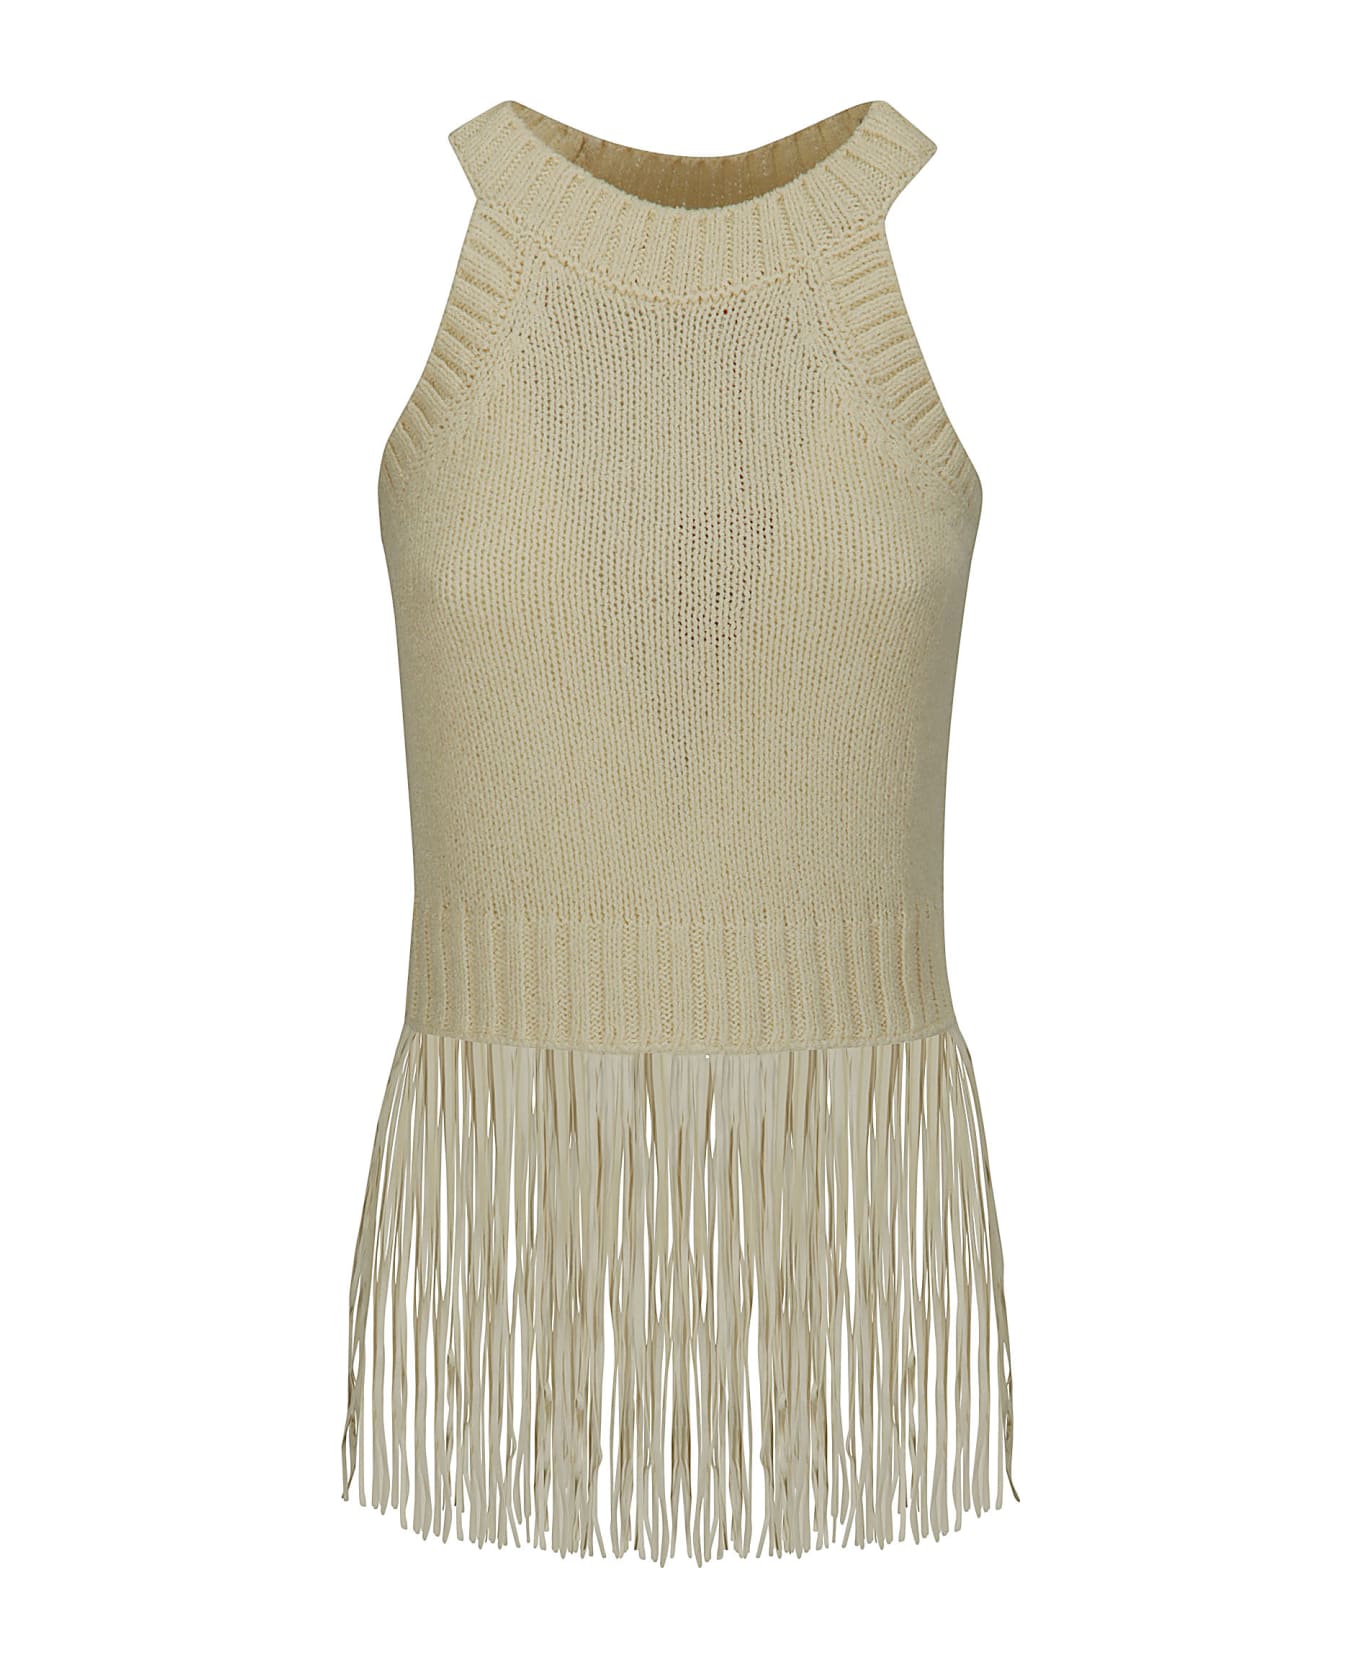 Wild Cashmere Cropped Top Tank With Suede Frings - OFF-WHITE